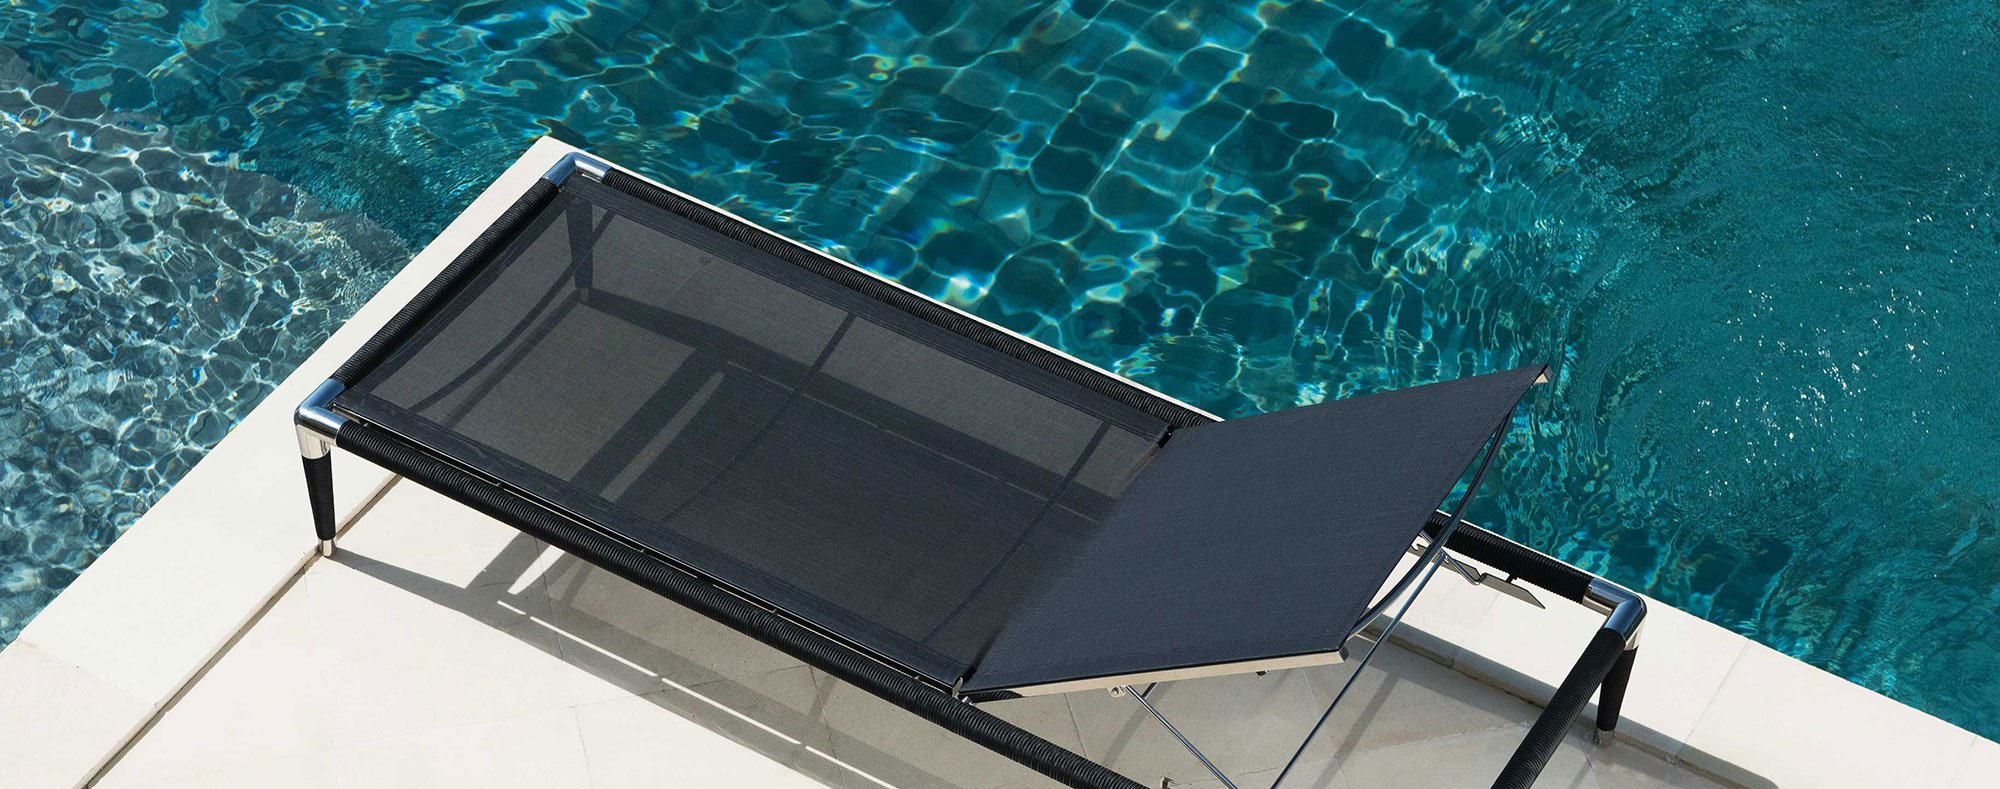 Black Marina sun lounger by the pool